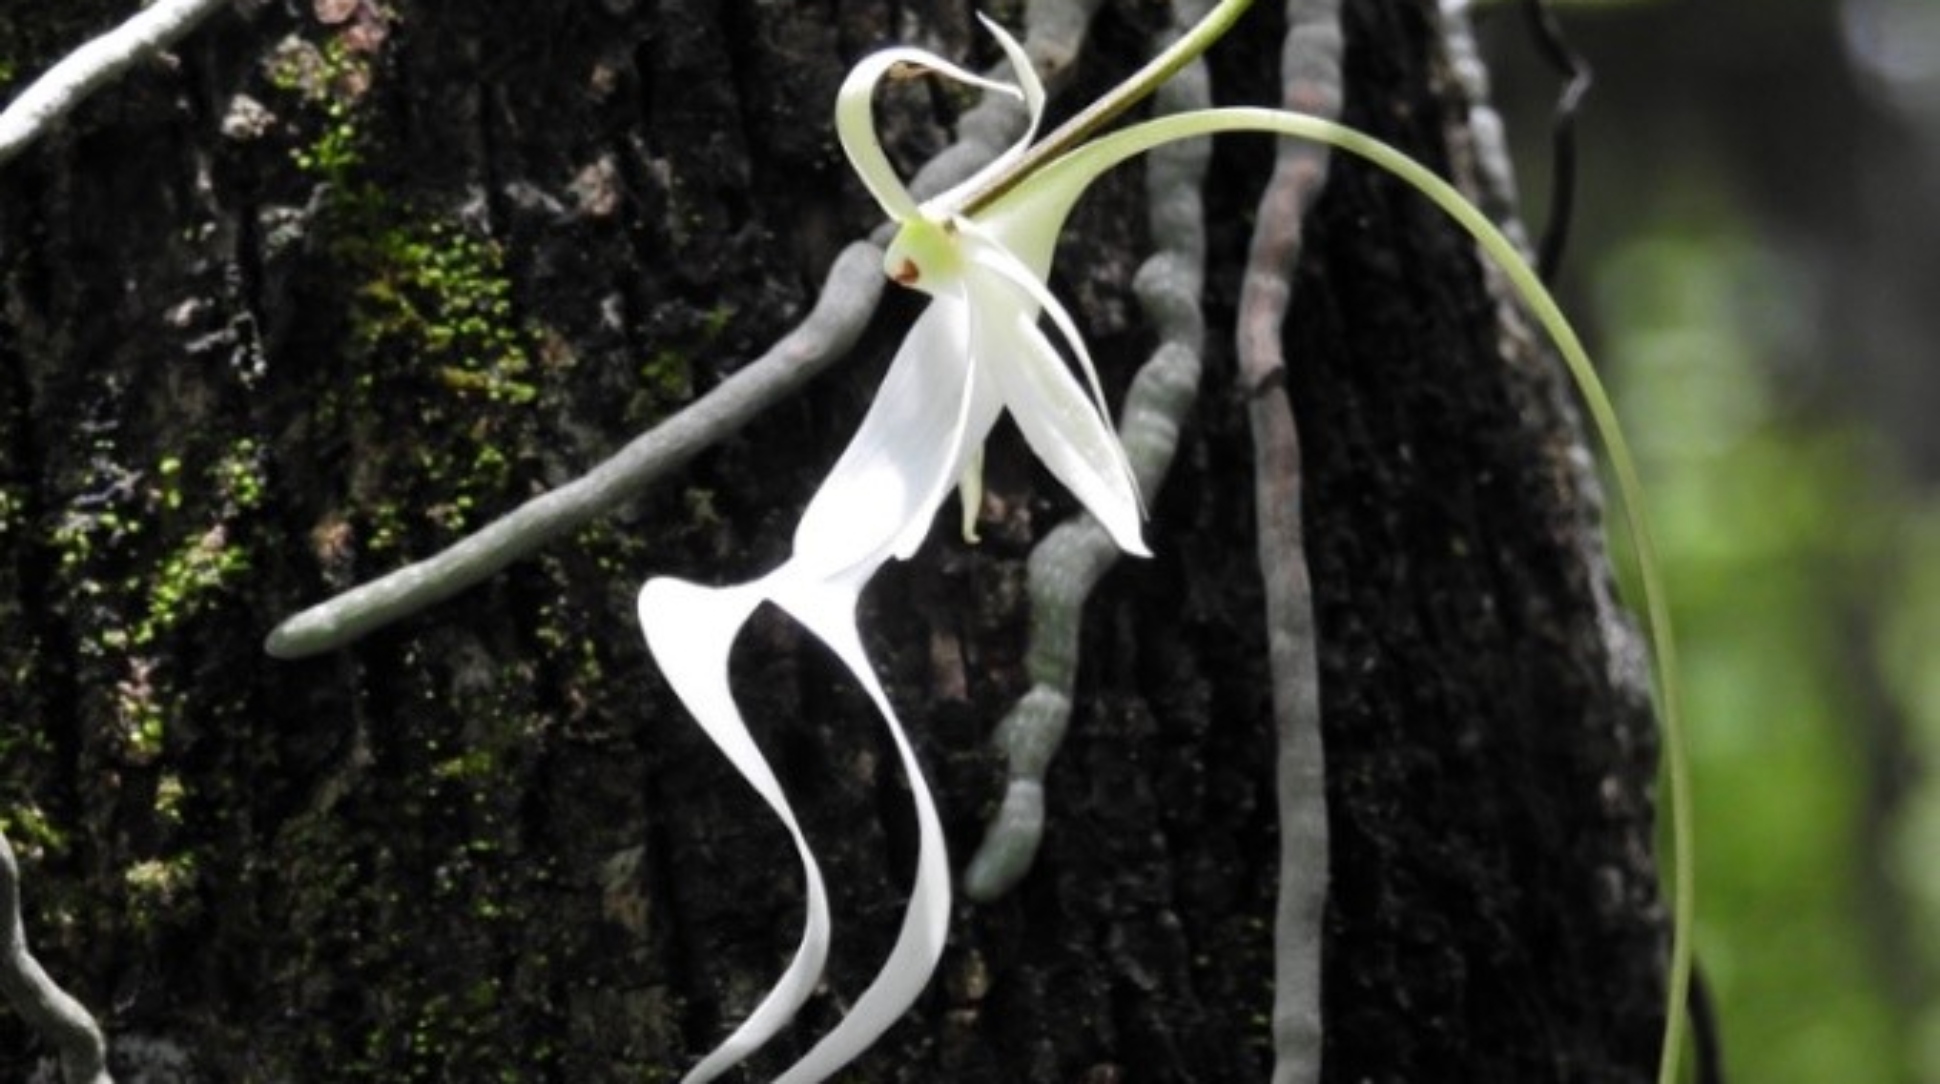 Rare Florida Ghost Orchid Flowers in UK for 1st Time